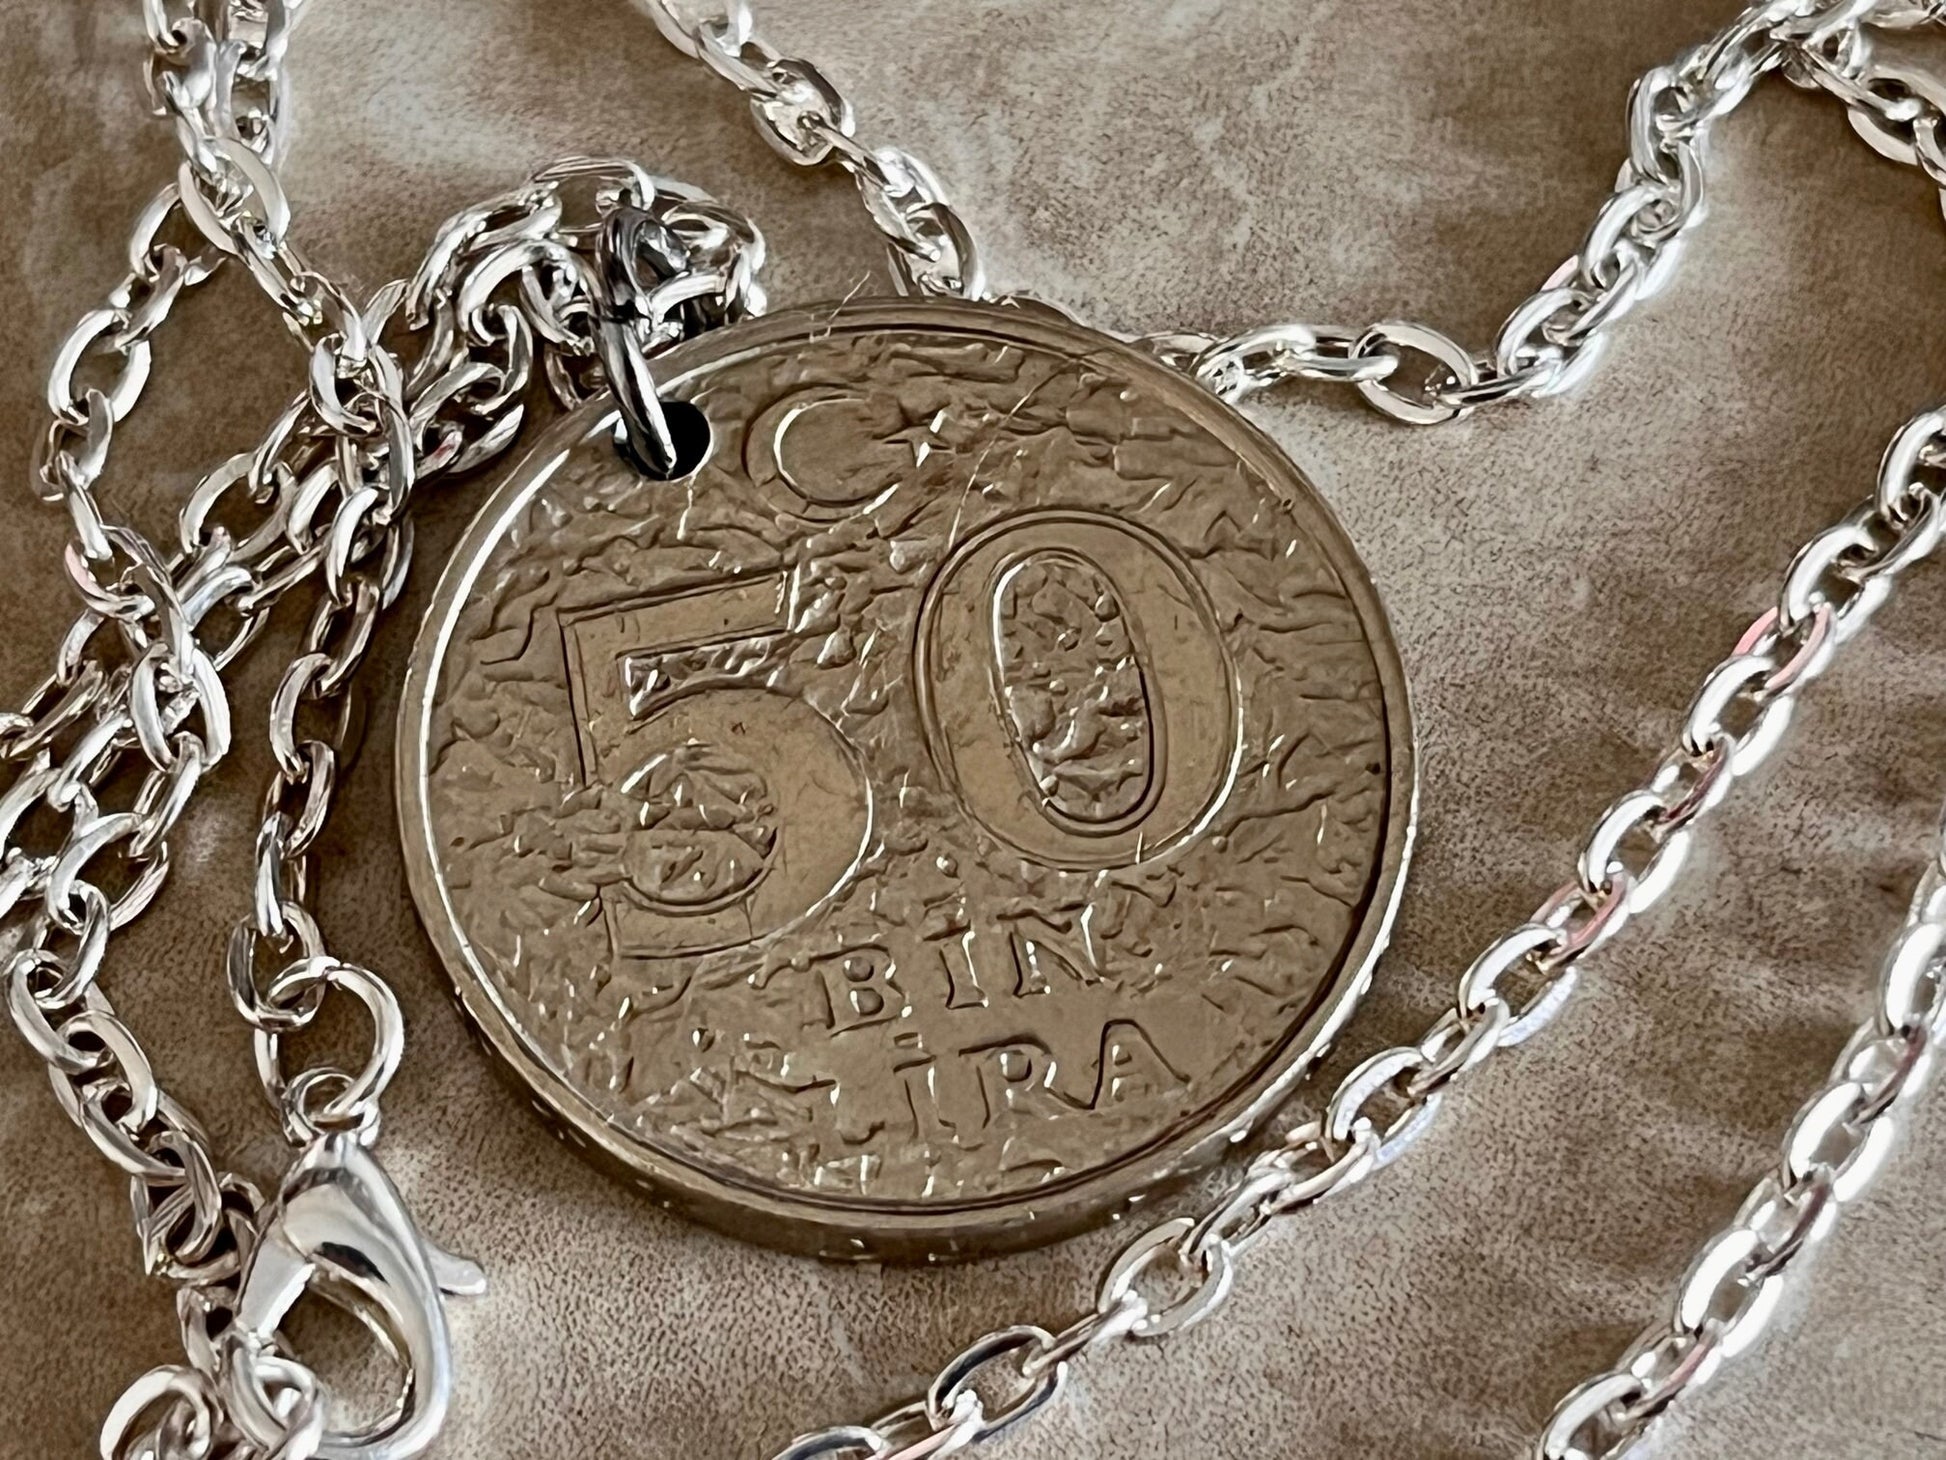 Turkey Coin Necklace Turkish Bib 50 Lira Pendant Personal Old Vintage Handmade Jewelry Gift Friend Charm For Him Her World Coin Collector